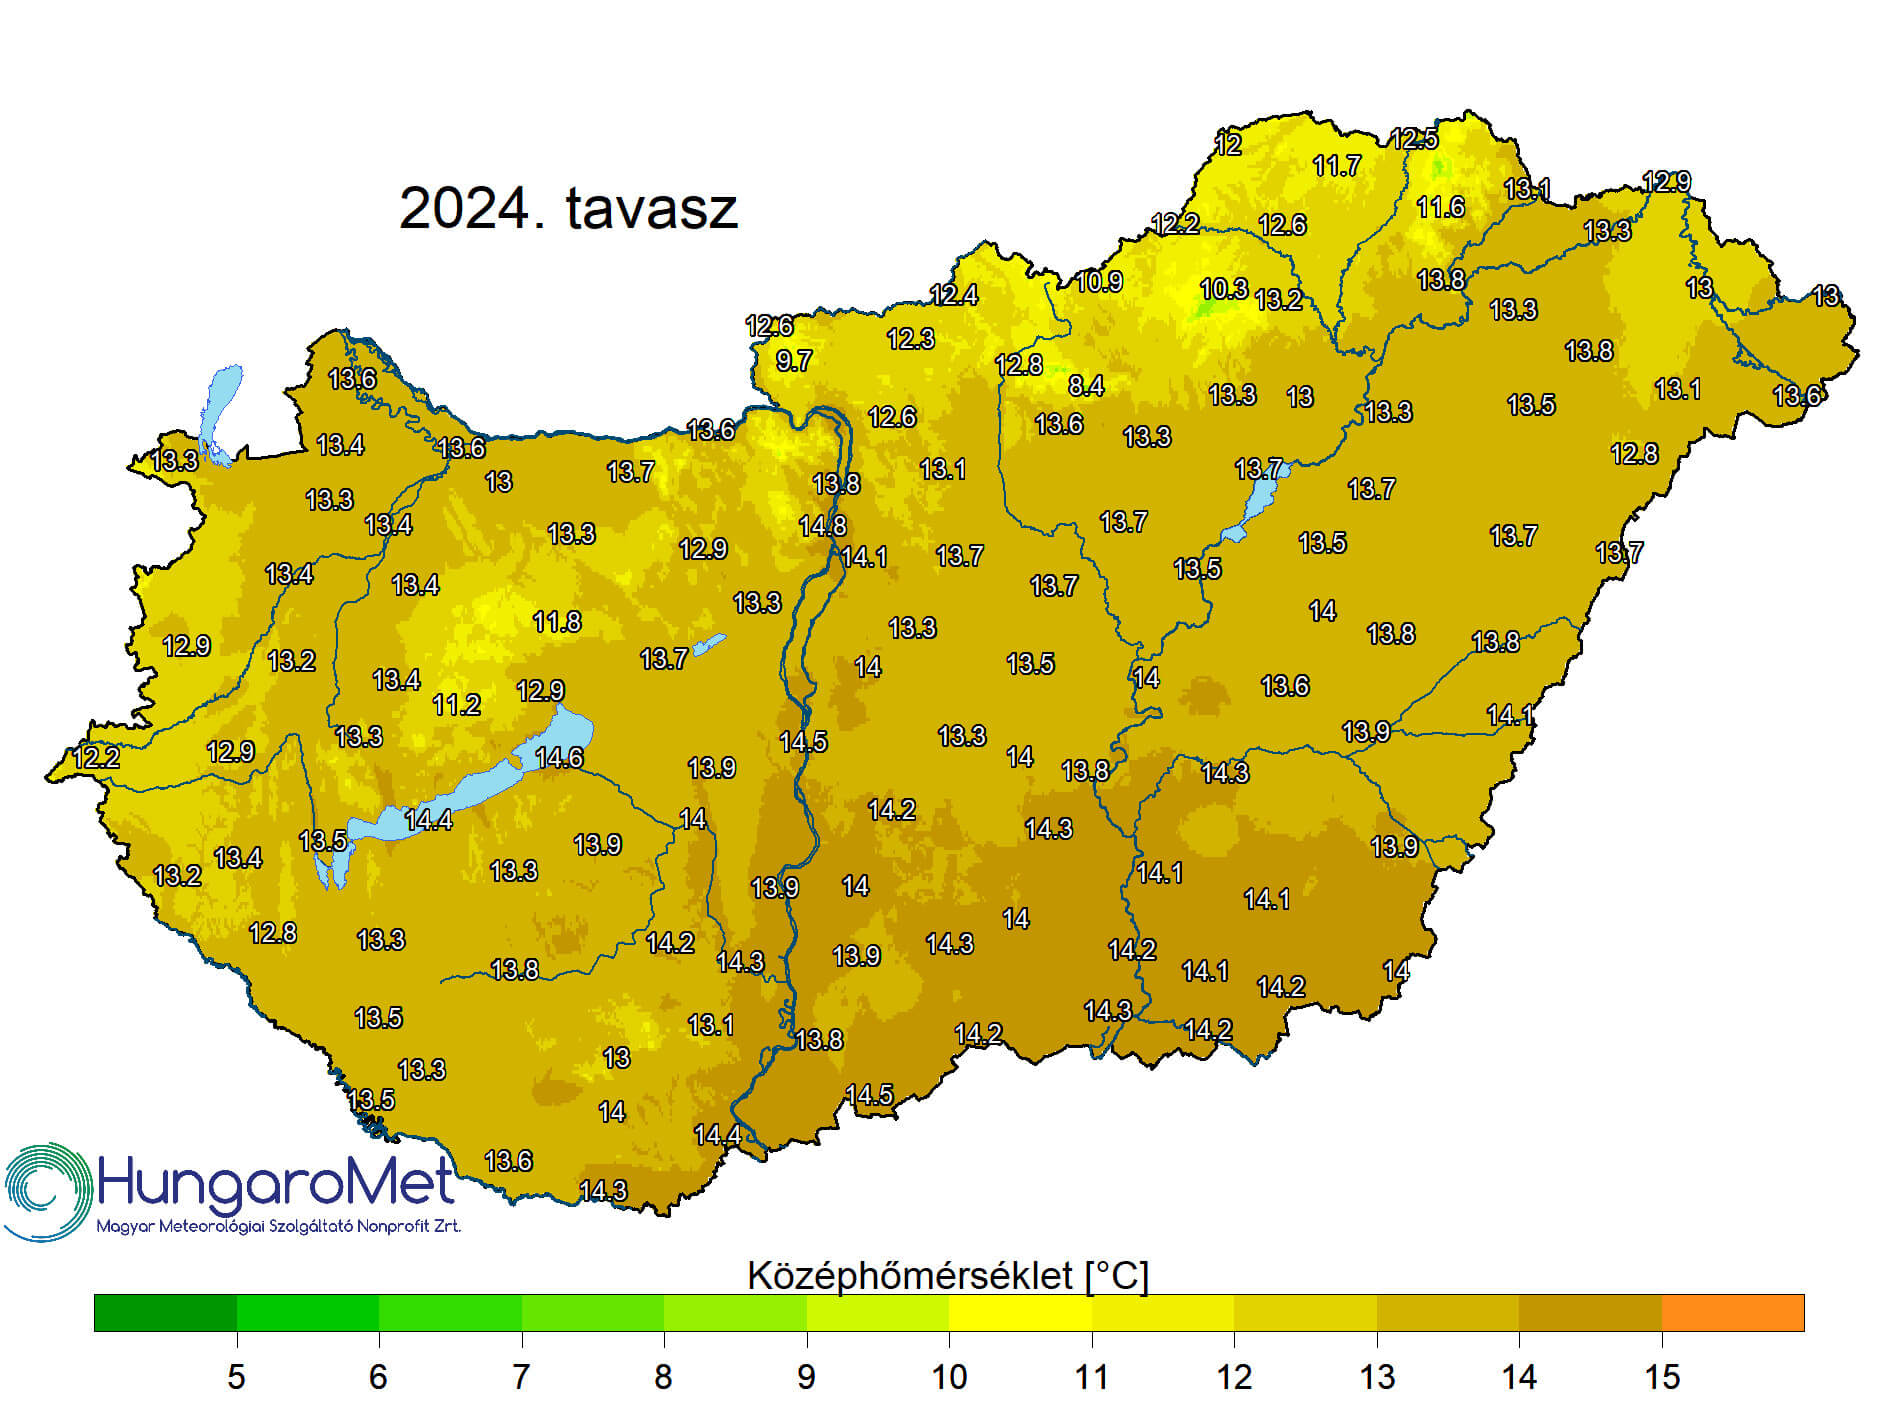 Hungary Had Hottest Spring on Record